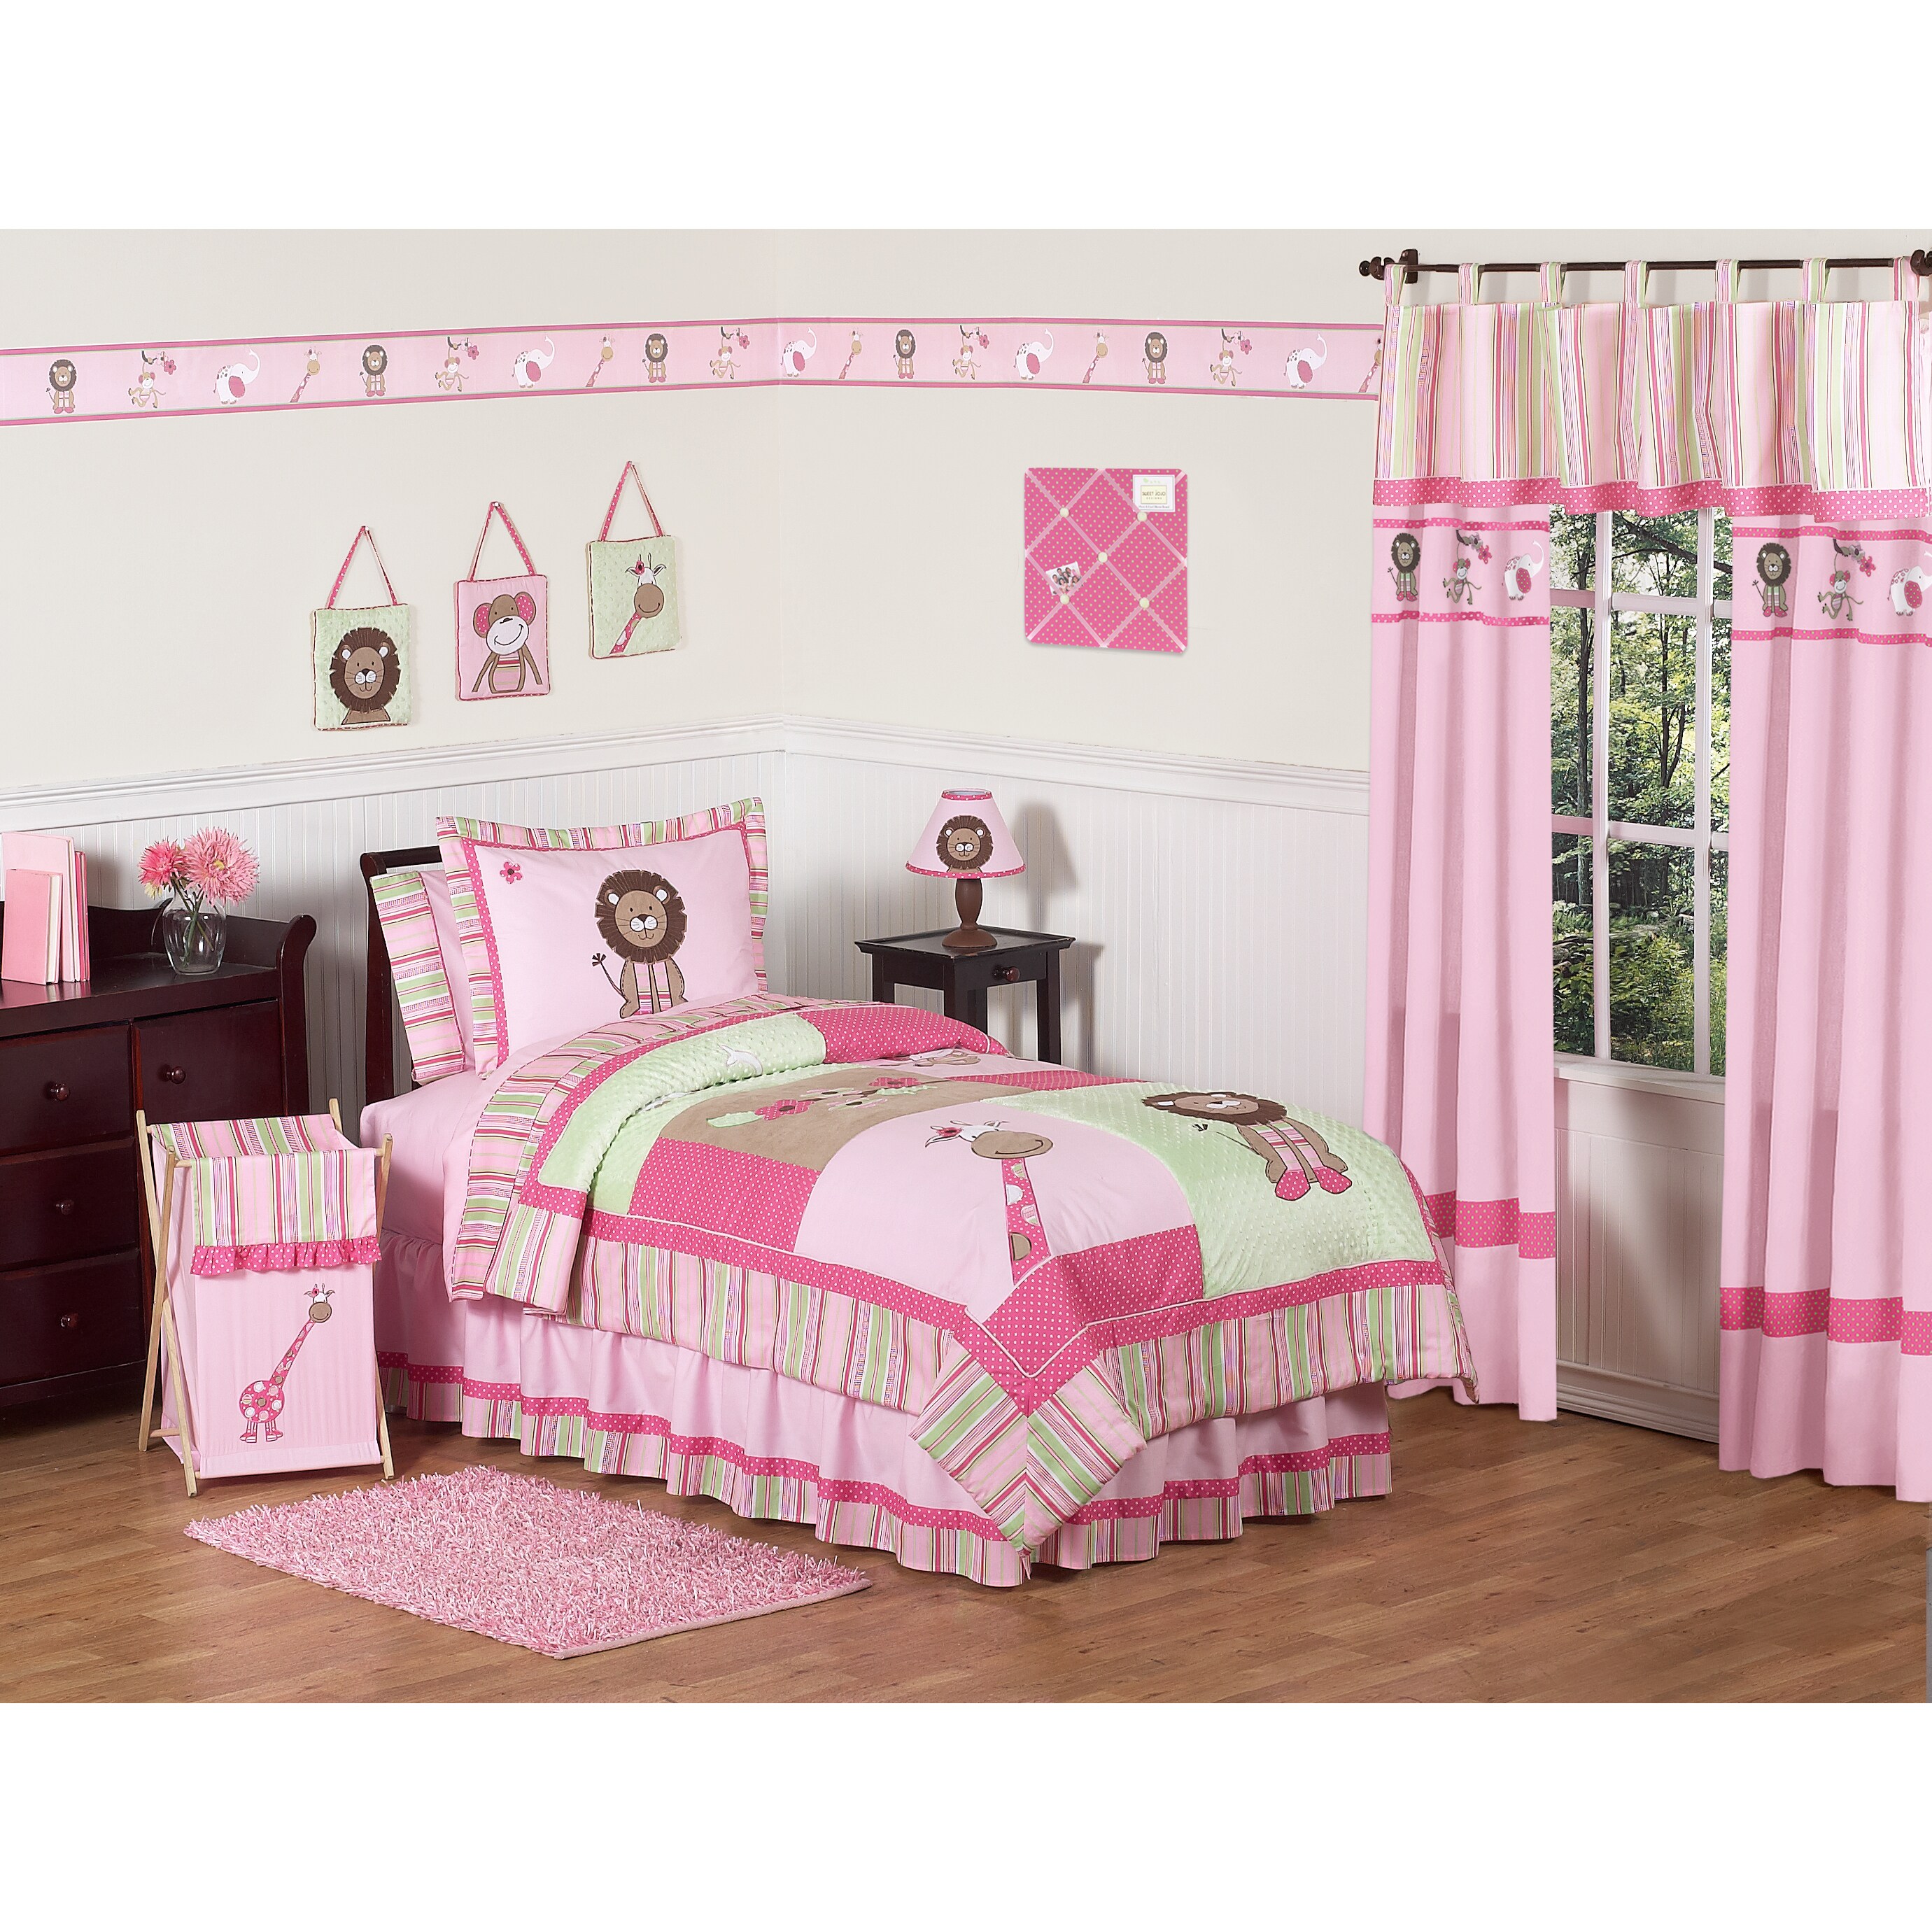 Sweet Jojo Designs Girls Jungle 4 piece Twin Comforter Set (Pink/ greenMaterials 100 percent cotton, suede, minky fabricsFill material PolyesterCare instructions Machine washableBrand Sweet Jojo DesignsComforter 62 inches wide x 86 inches longSham 2